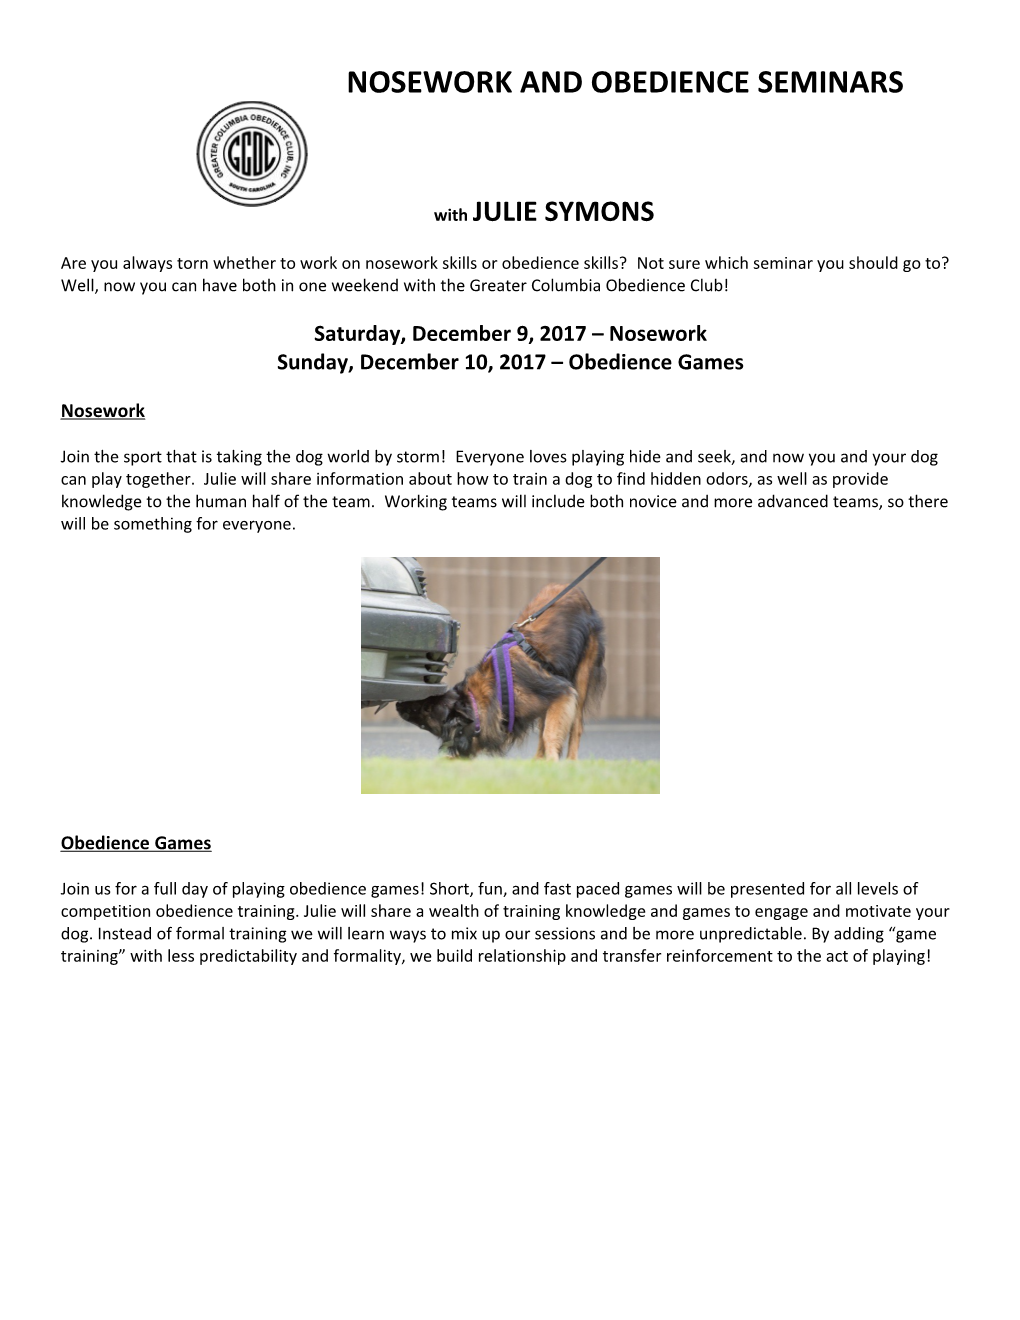 Nosework and Obedience Seminars